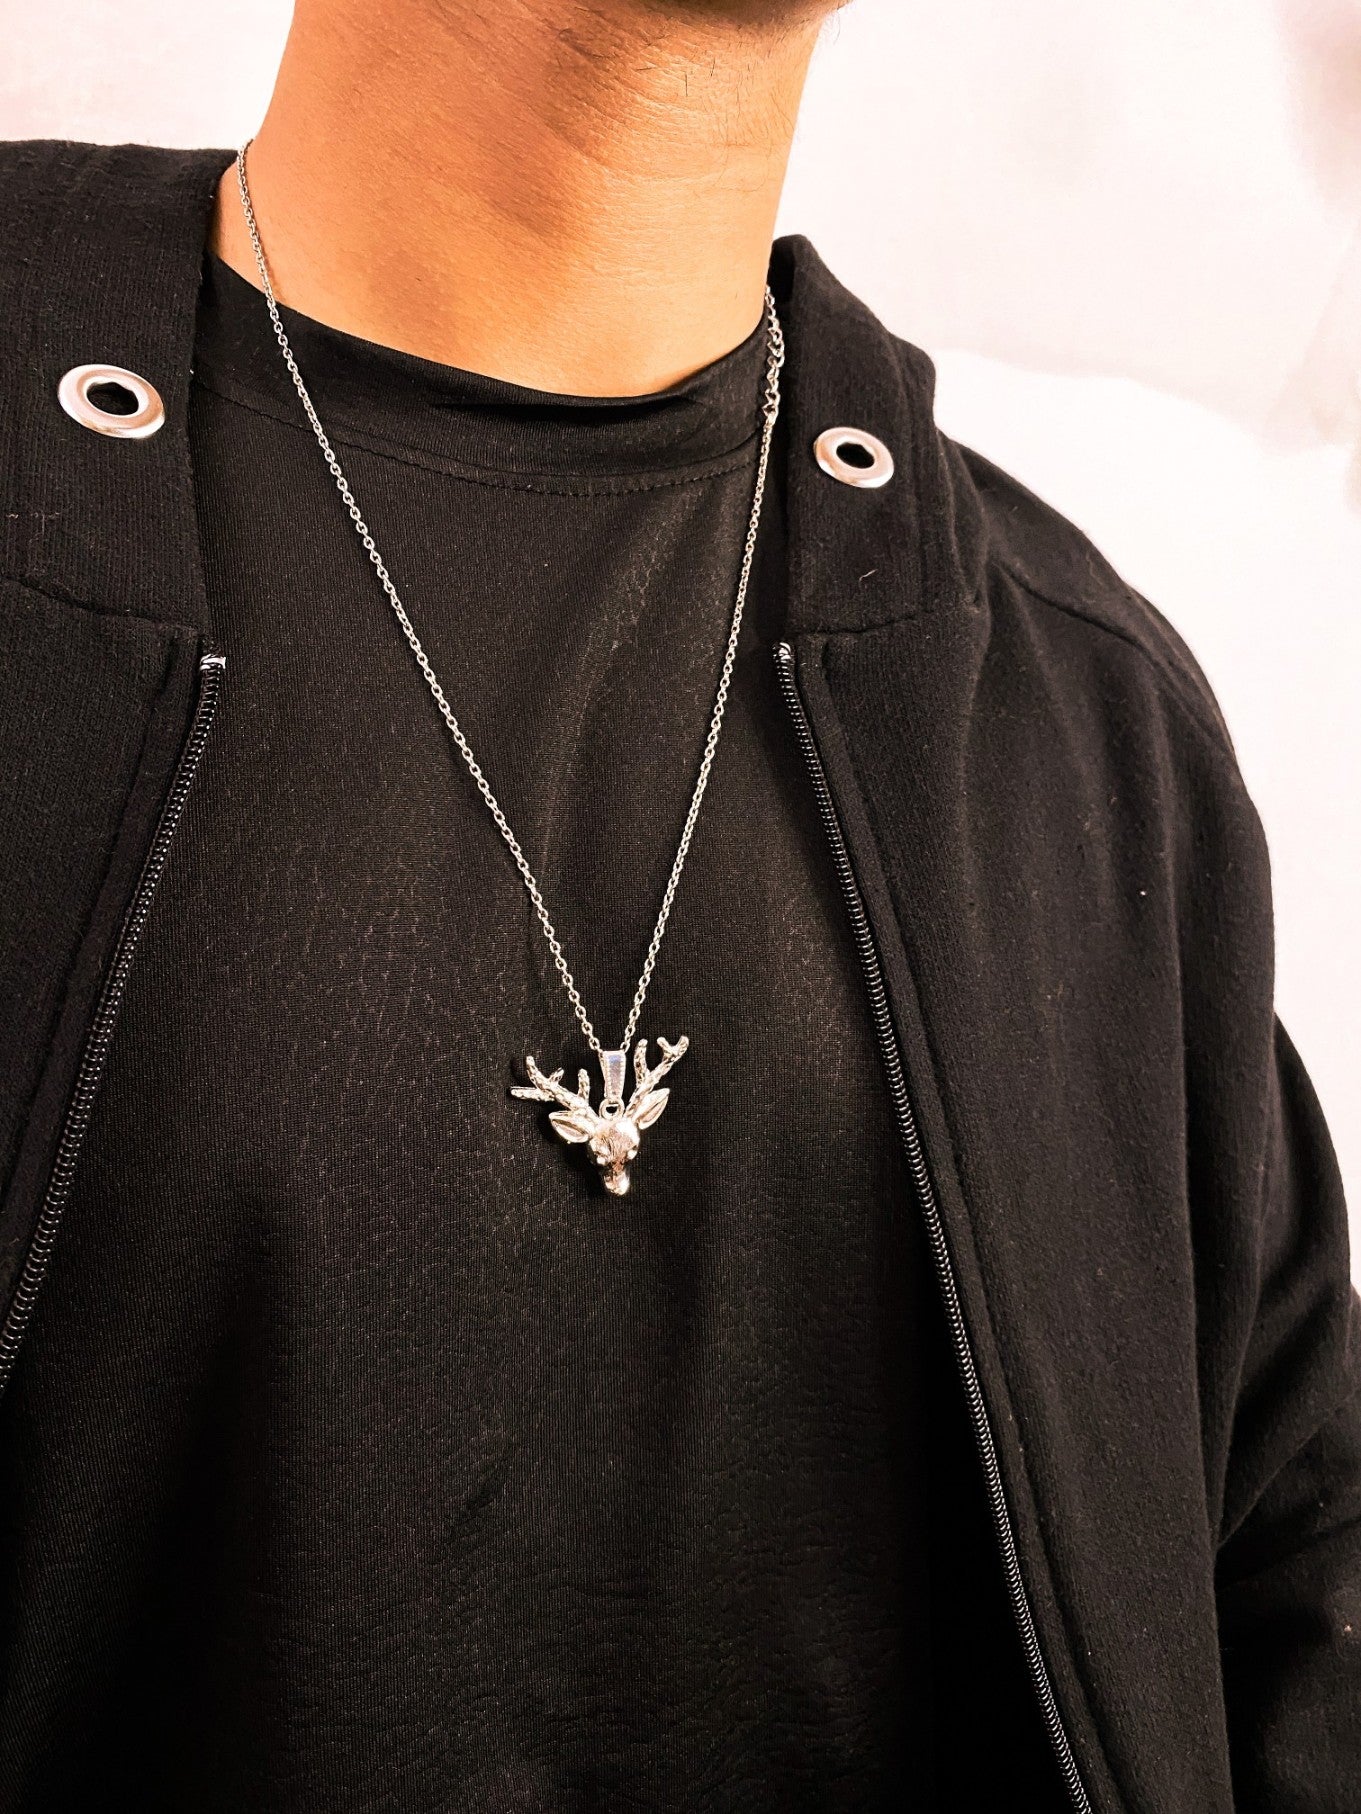 Deer Head Silver Pendant With Chain